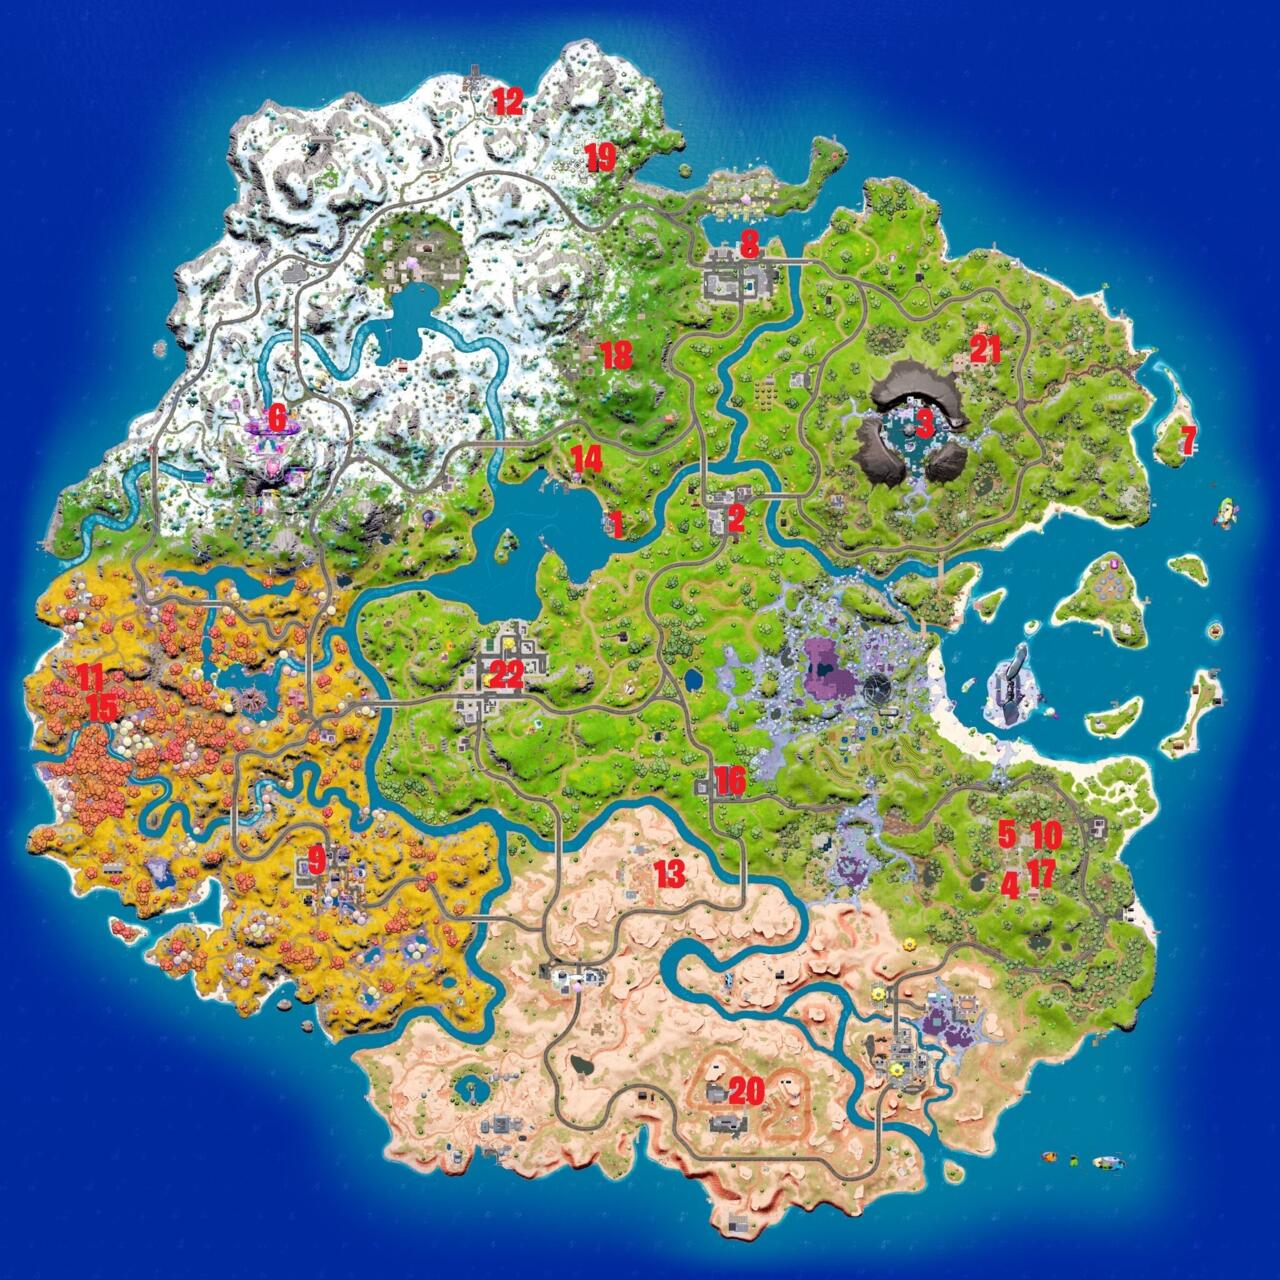 Fortnite Characters In Chapter 3, Season 4 – All 22 NPC Locations